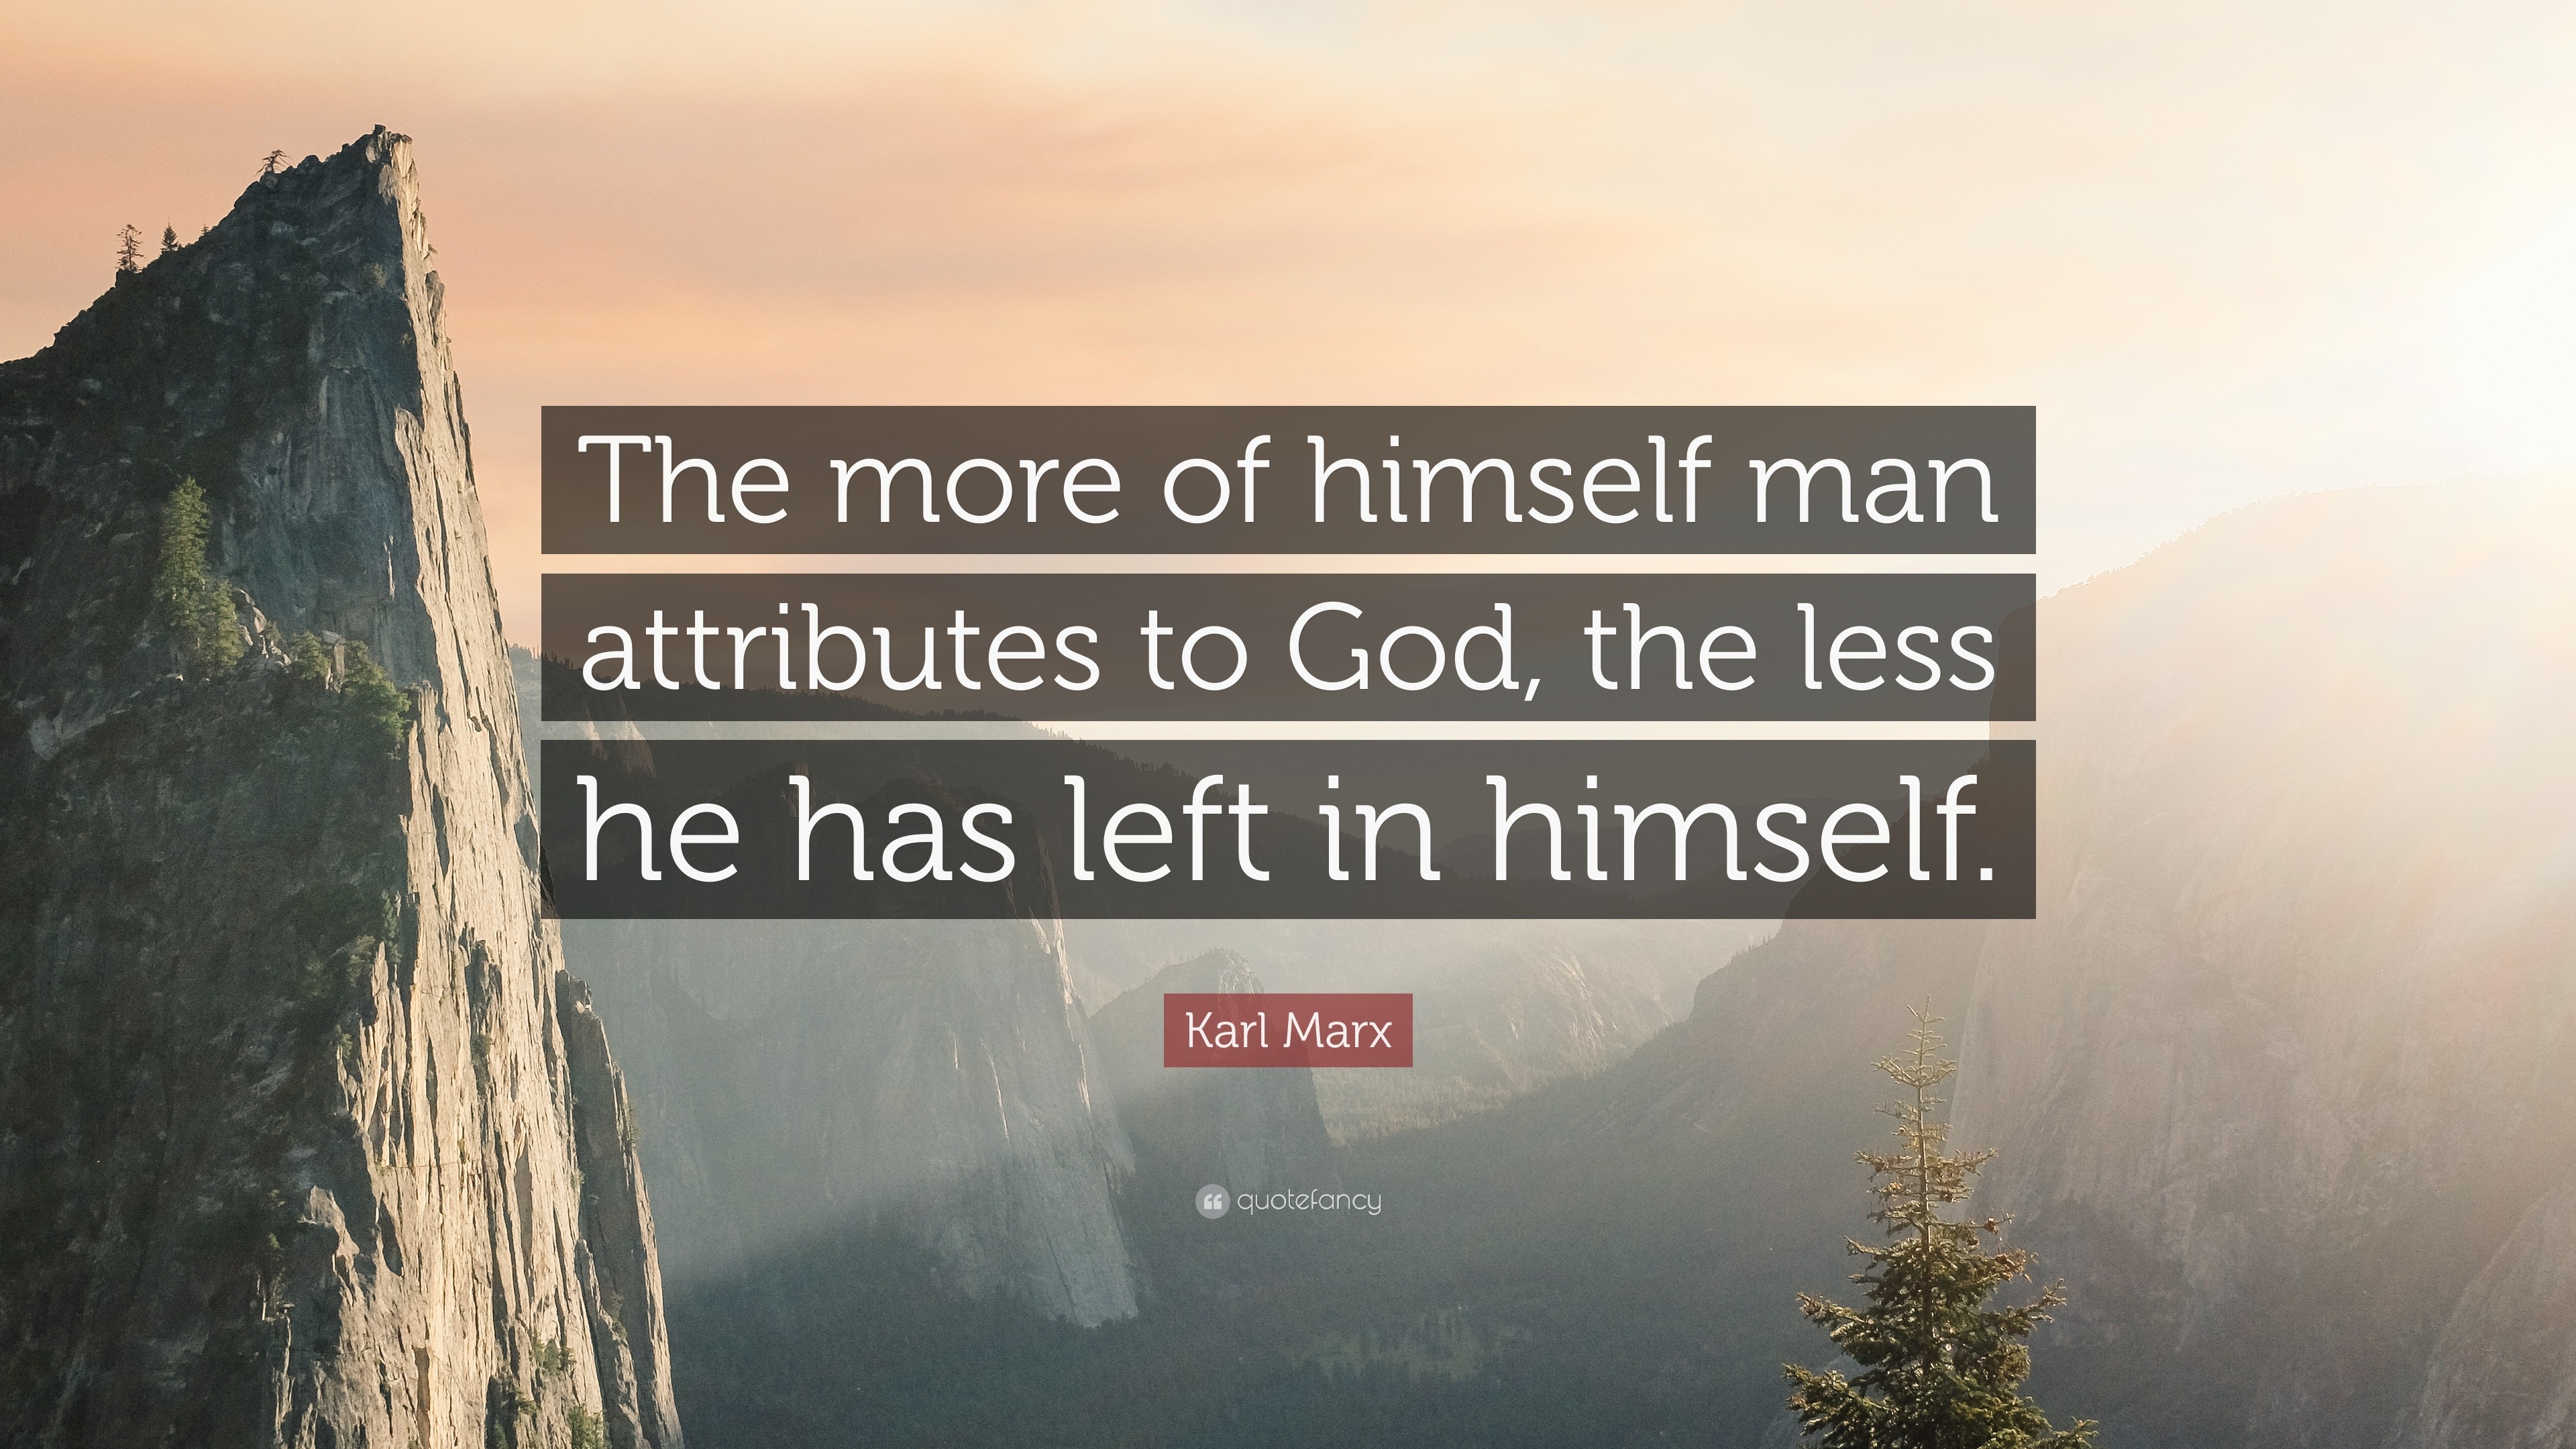 Karl Marx Quote The More Of Himself Man Attributes To God The Images, Photos, Reviews